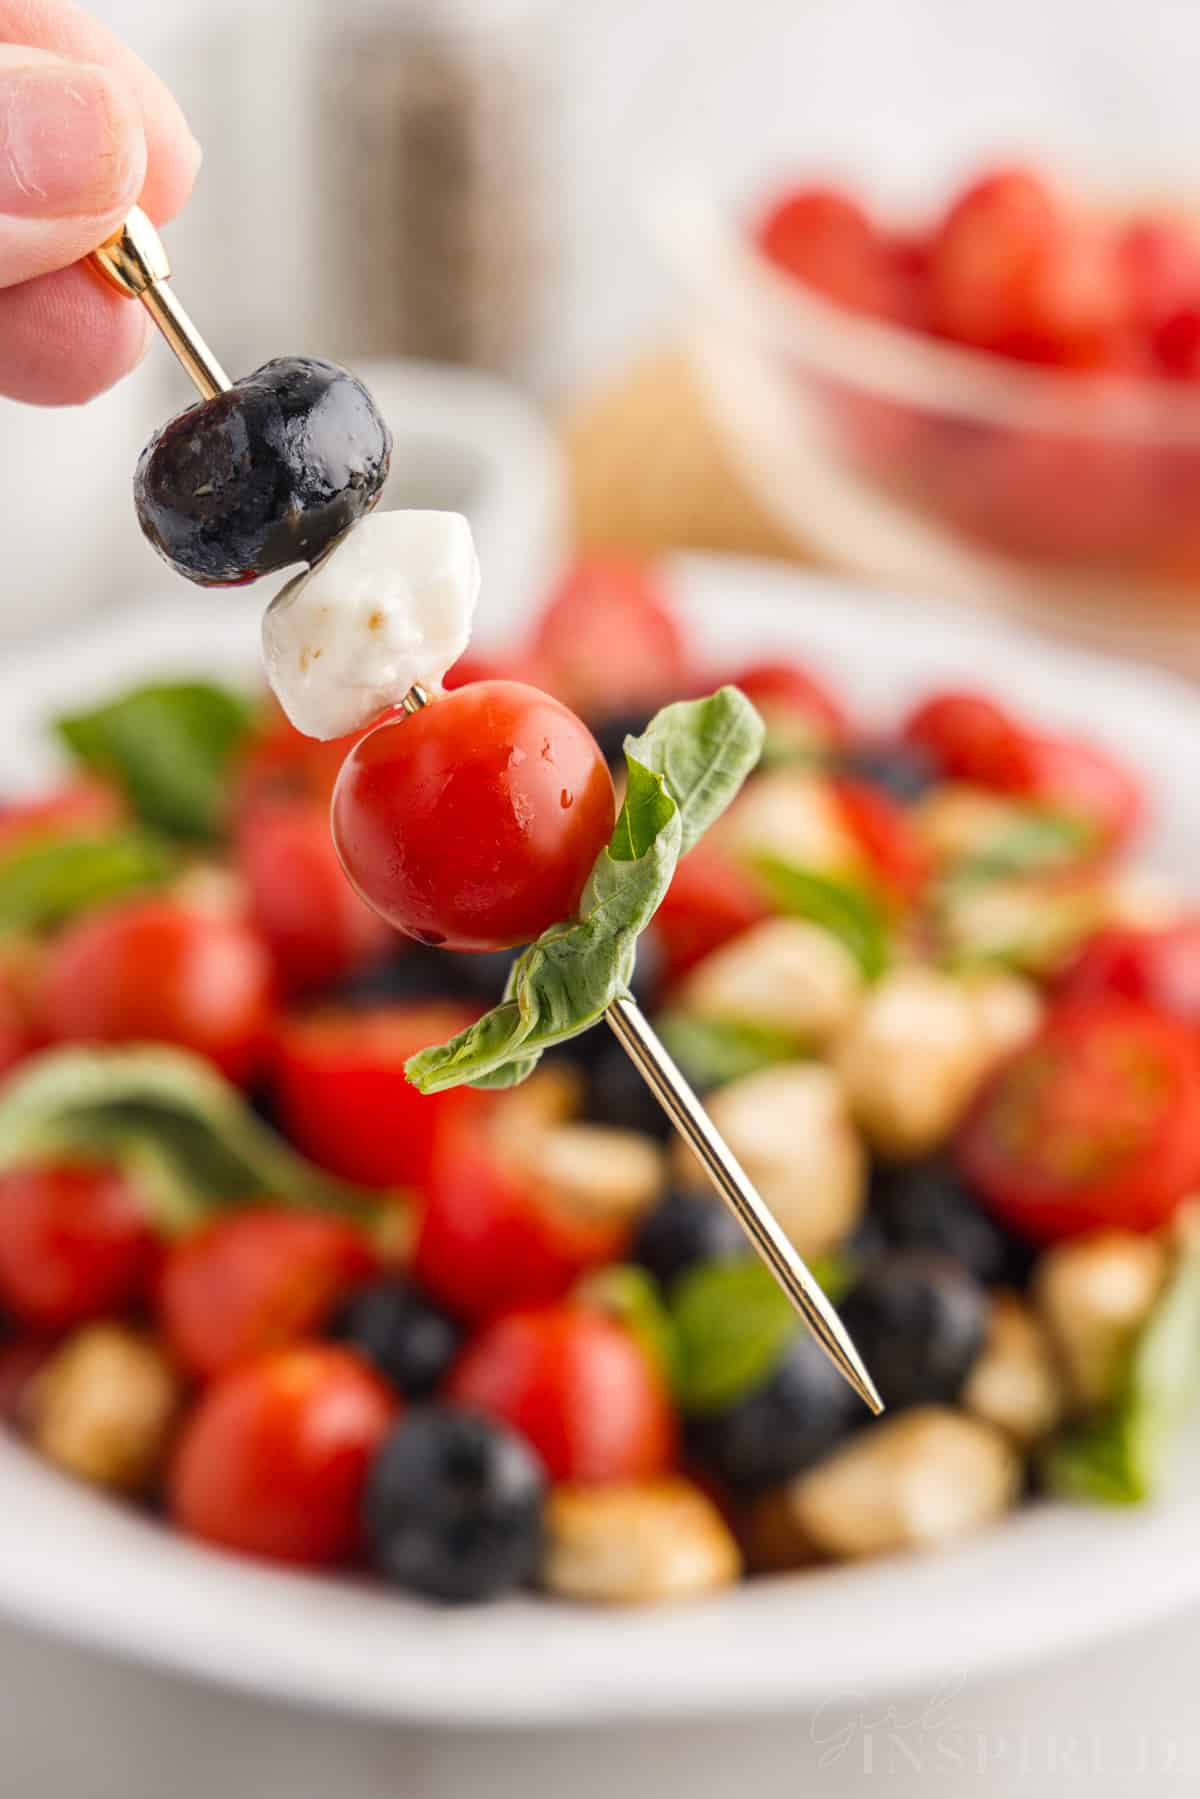 A skewer with a blueberry, piece of mozzarella, a tomato and a piece of basil.